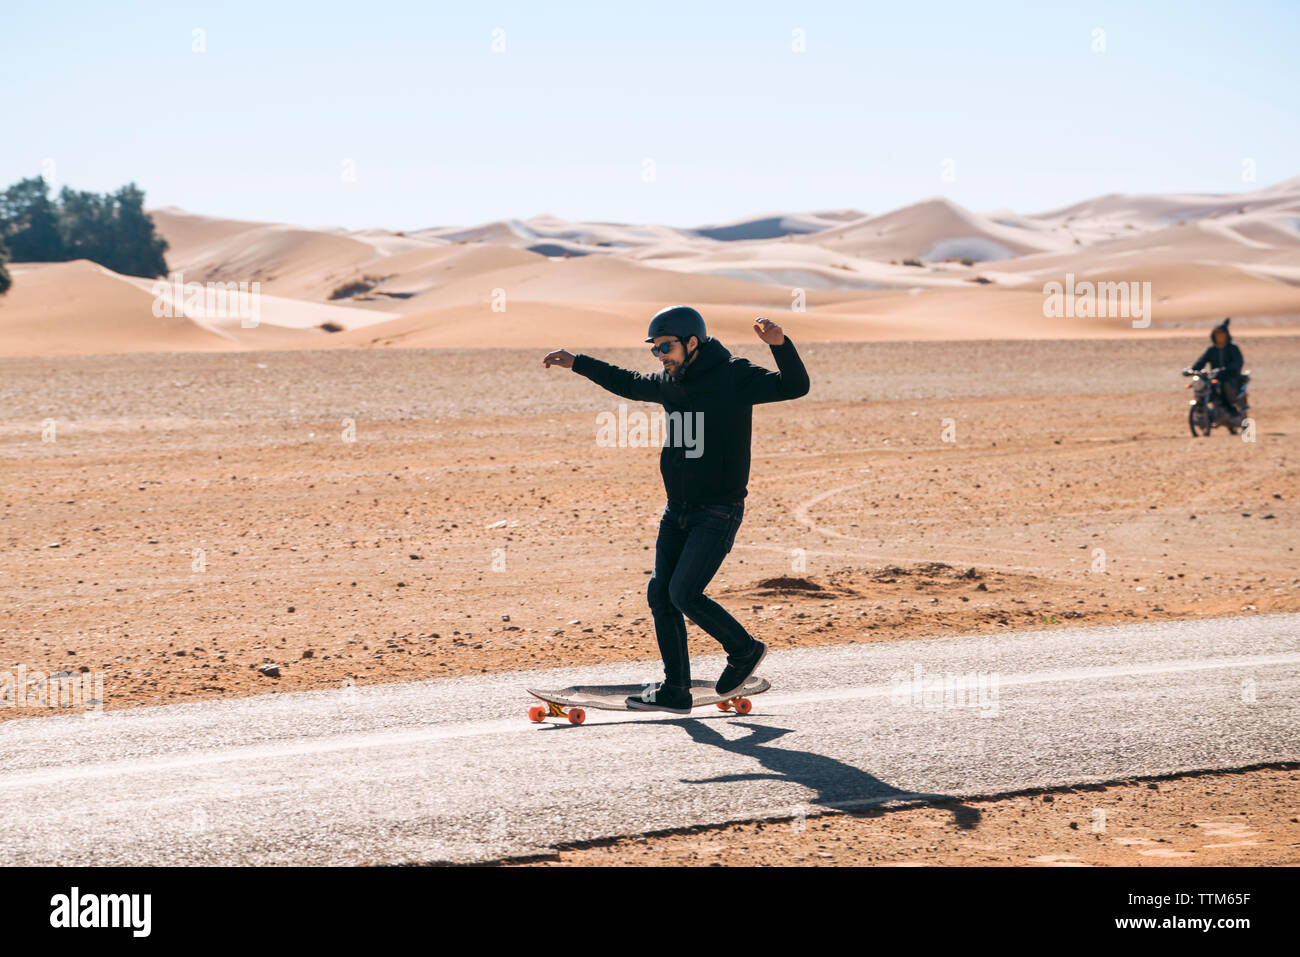 Full length of man skateboarding on road amidst field against sky during sunny day Stock Photo